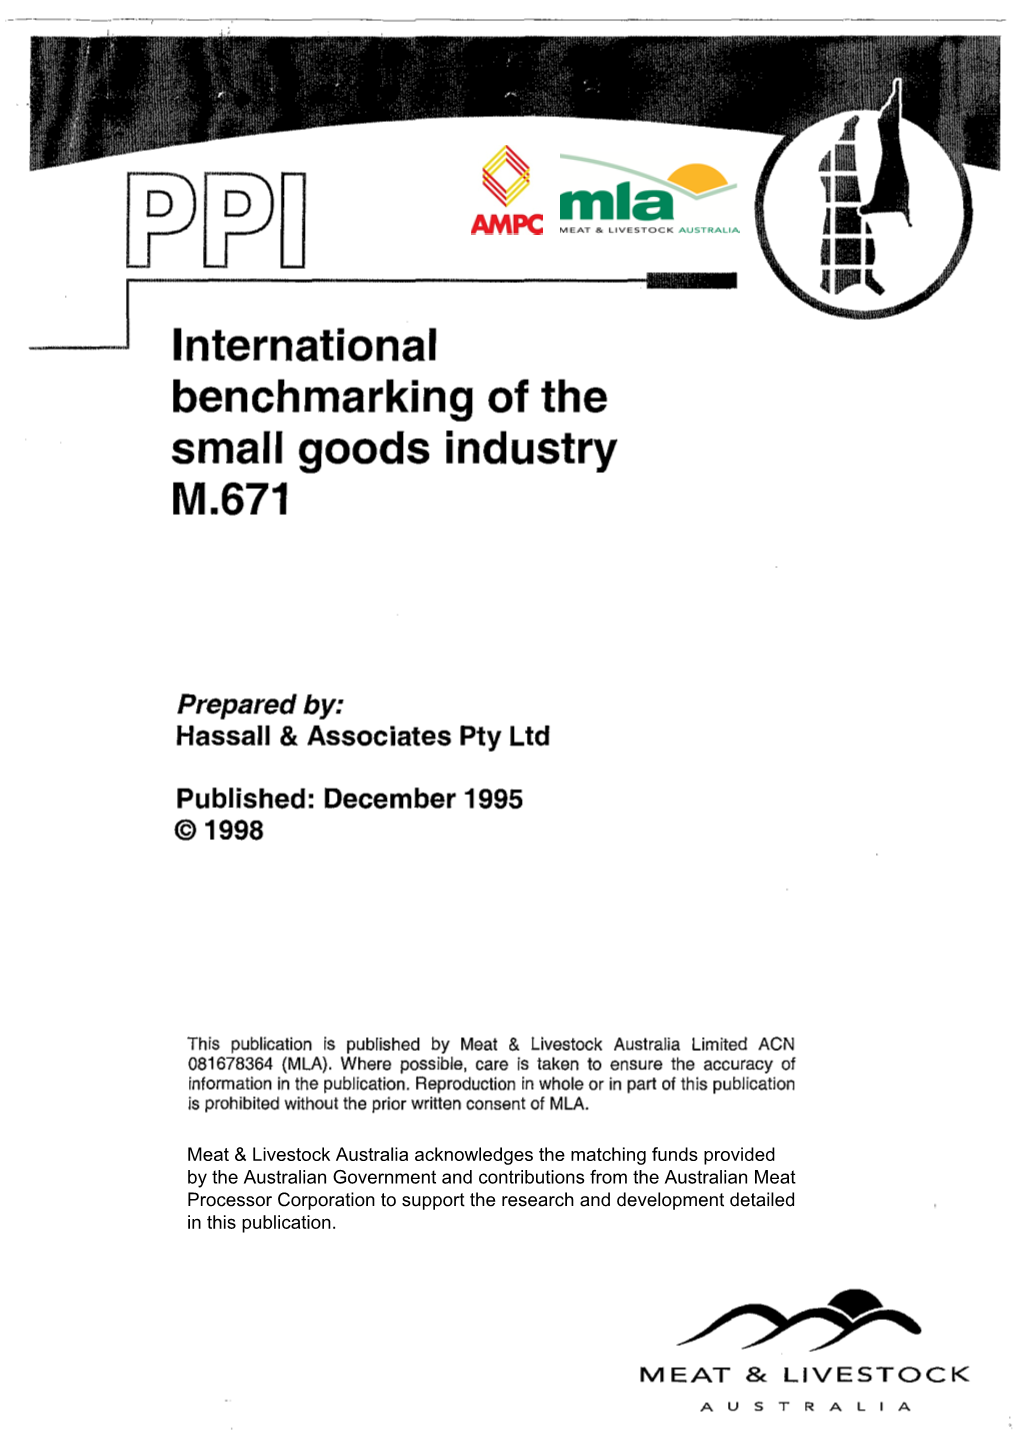 International Benchmarking of the Small Goods Industry M.671